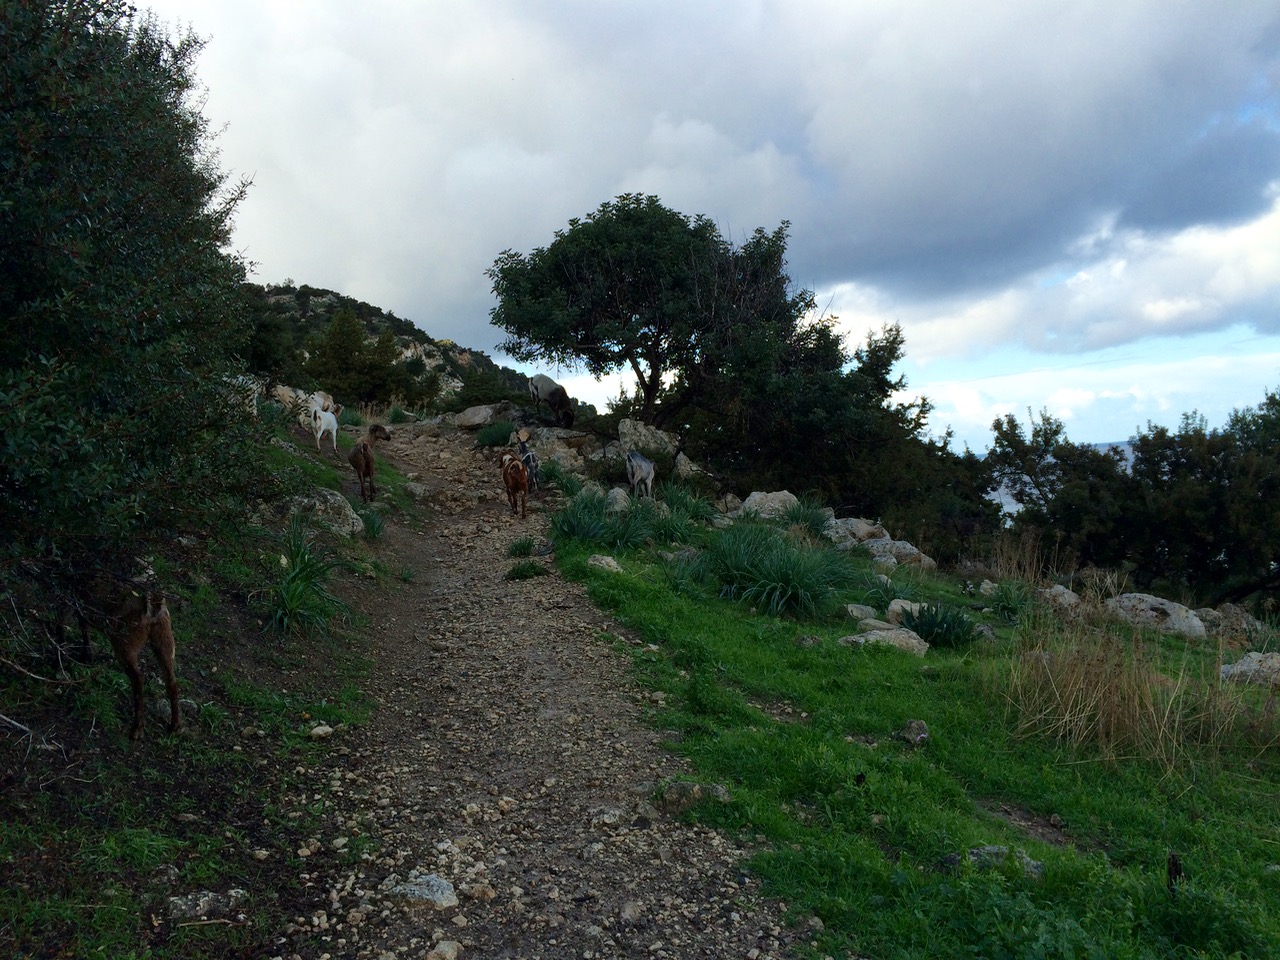 Goats of Cyprus